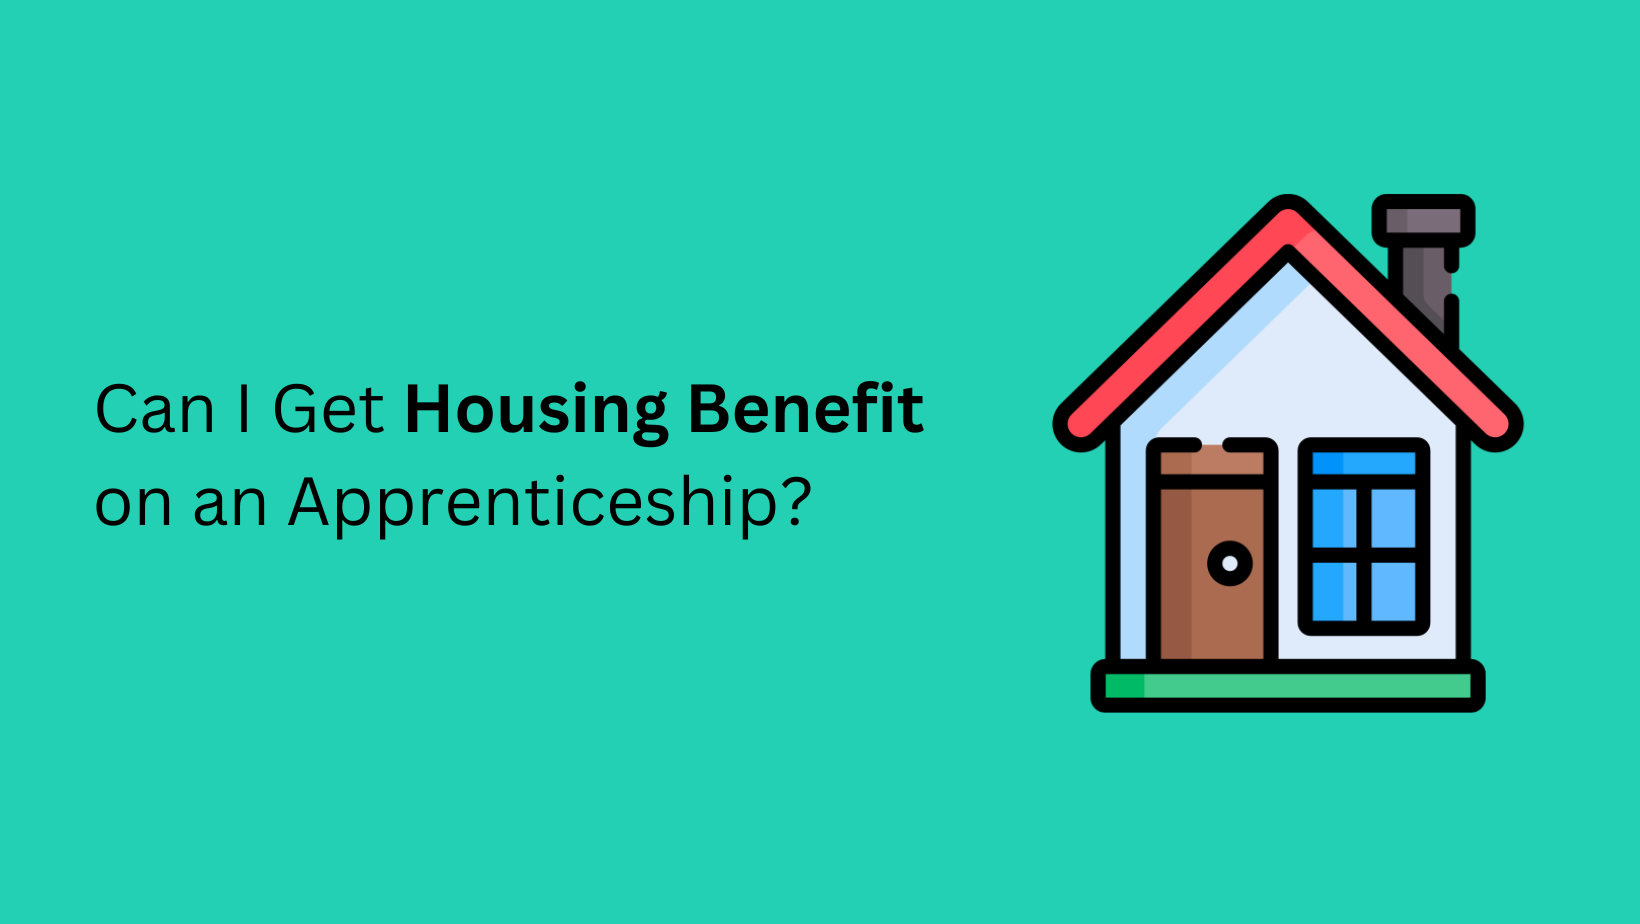 Can I Get Housing Benefit on an Apprenticeship